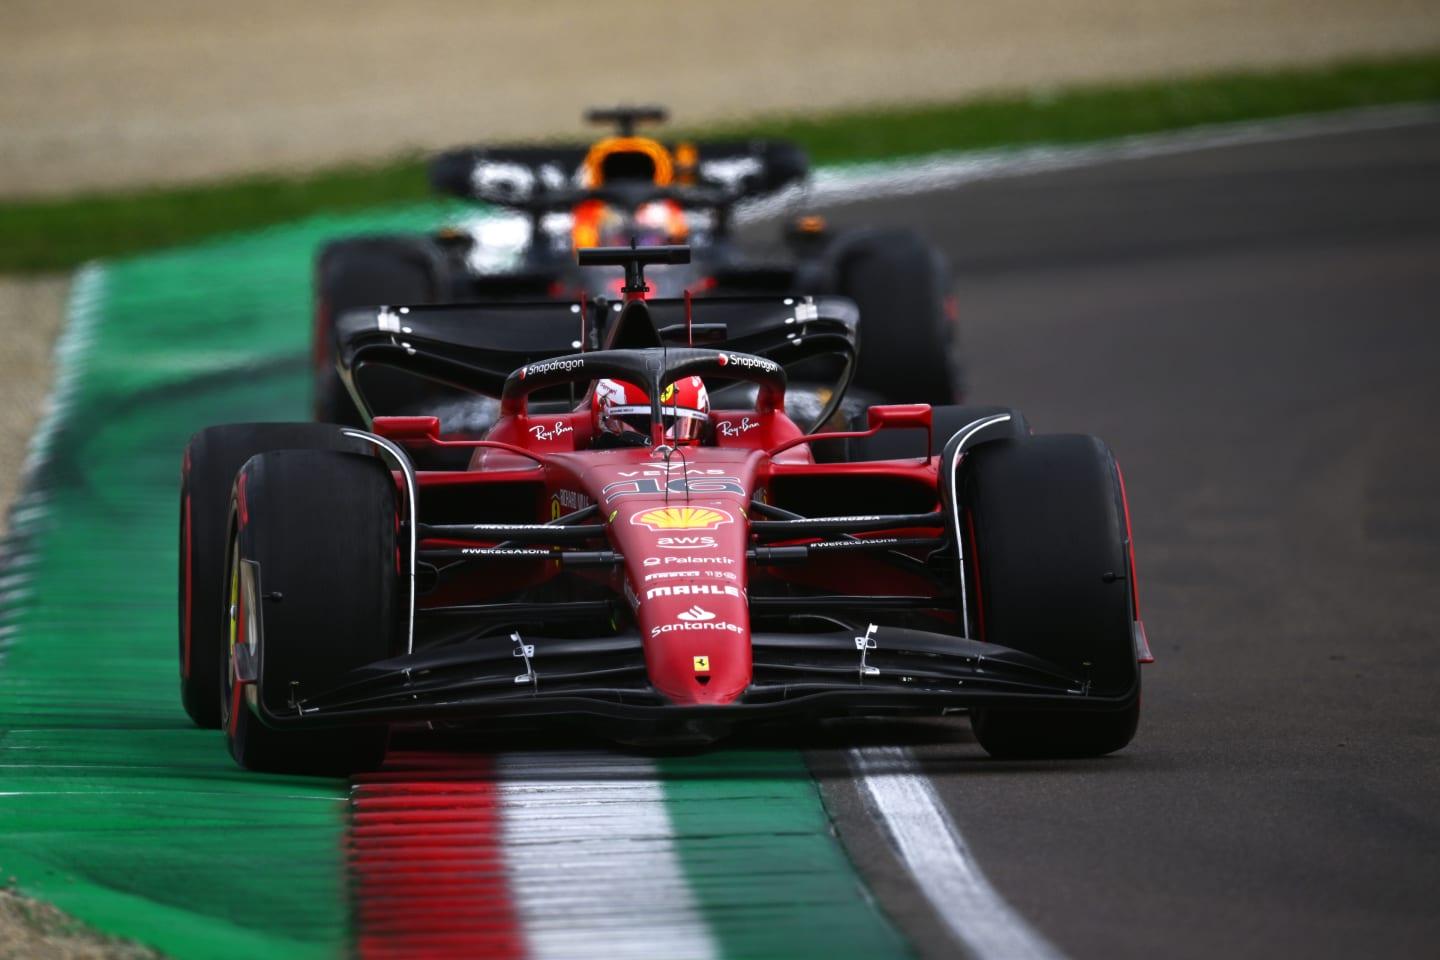 IMOLA, ITALY - APRIL 23: Charles Leclerc of Monaco driving (16) the Ferrari F1-75 leads Max Verstappen of the Netherlands driving the (1) Oracle Red Bull Racing RB18 on track during Sprint ahead of the F1 Grand Prix of Emilia Romagna at Autodromo Enzo e Dino Ferrari on April 23, 2022 in Imola, Italy. (Photo by Clive Mason/Getty Images)